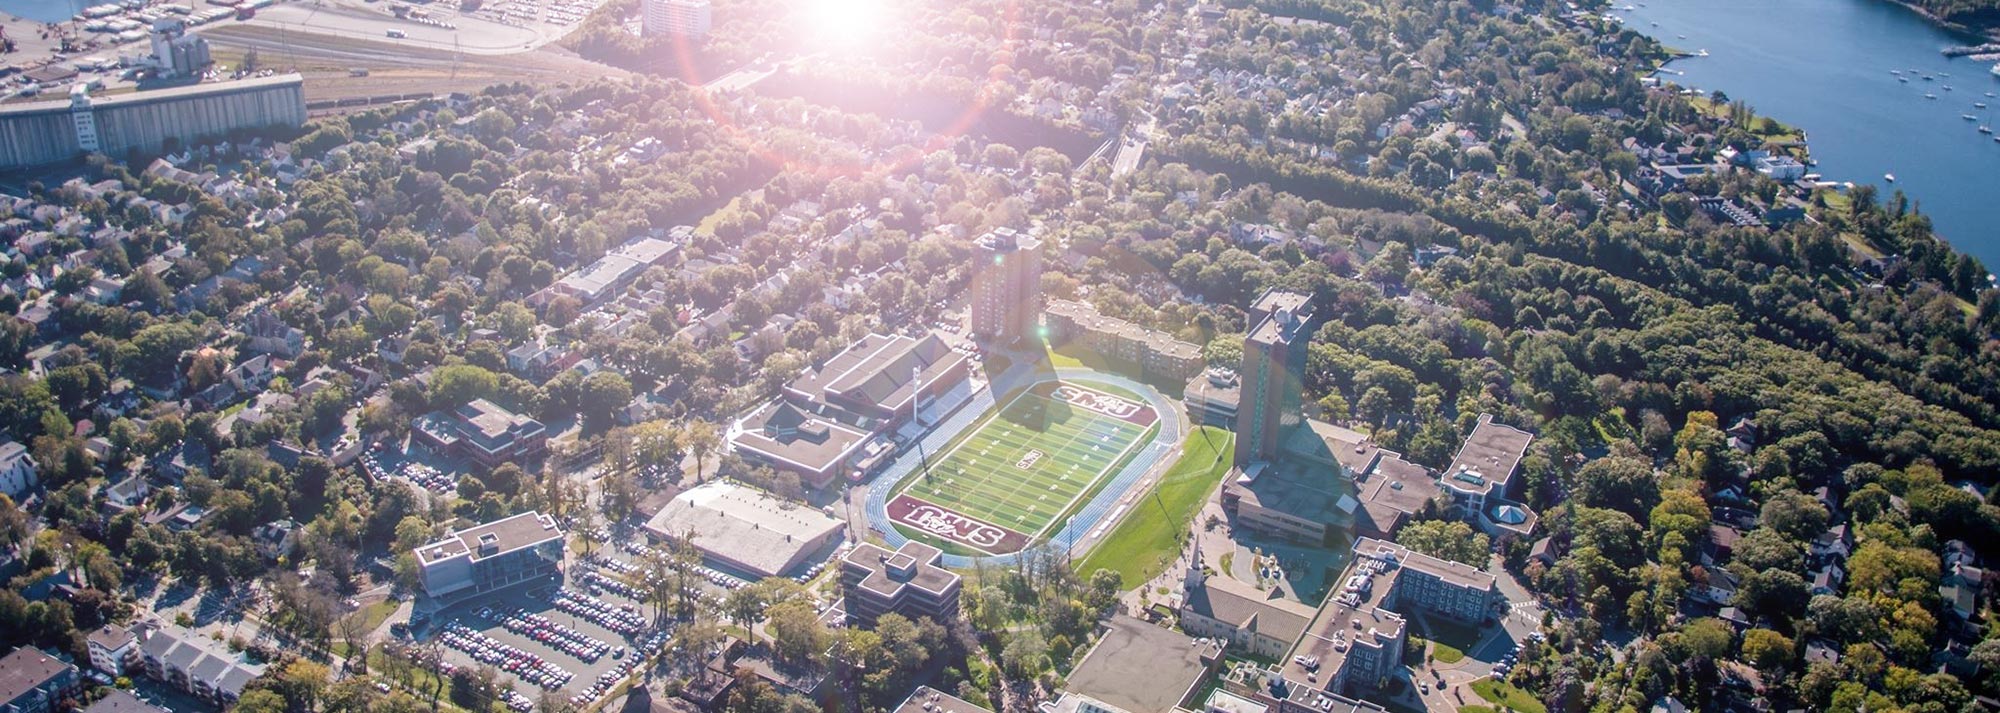 The Saint Mary's campus,  with the sun shining, taken from above.